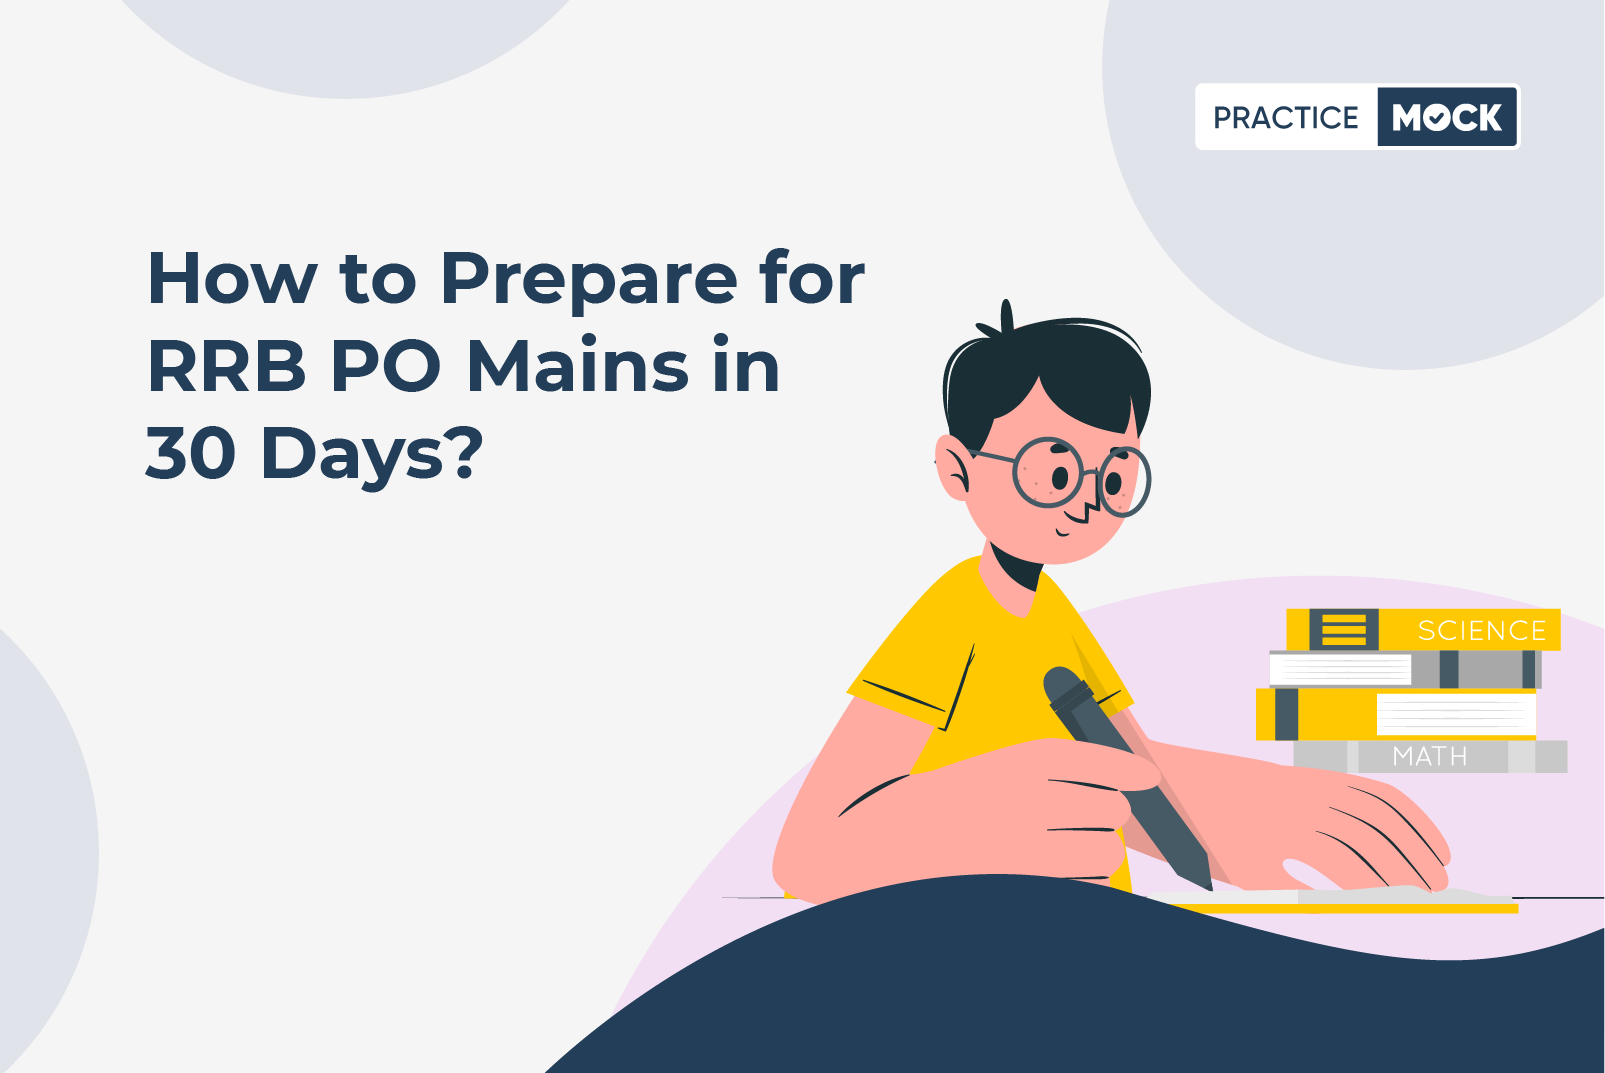 How to prepare for RRB PO Mains in 30 Days?